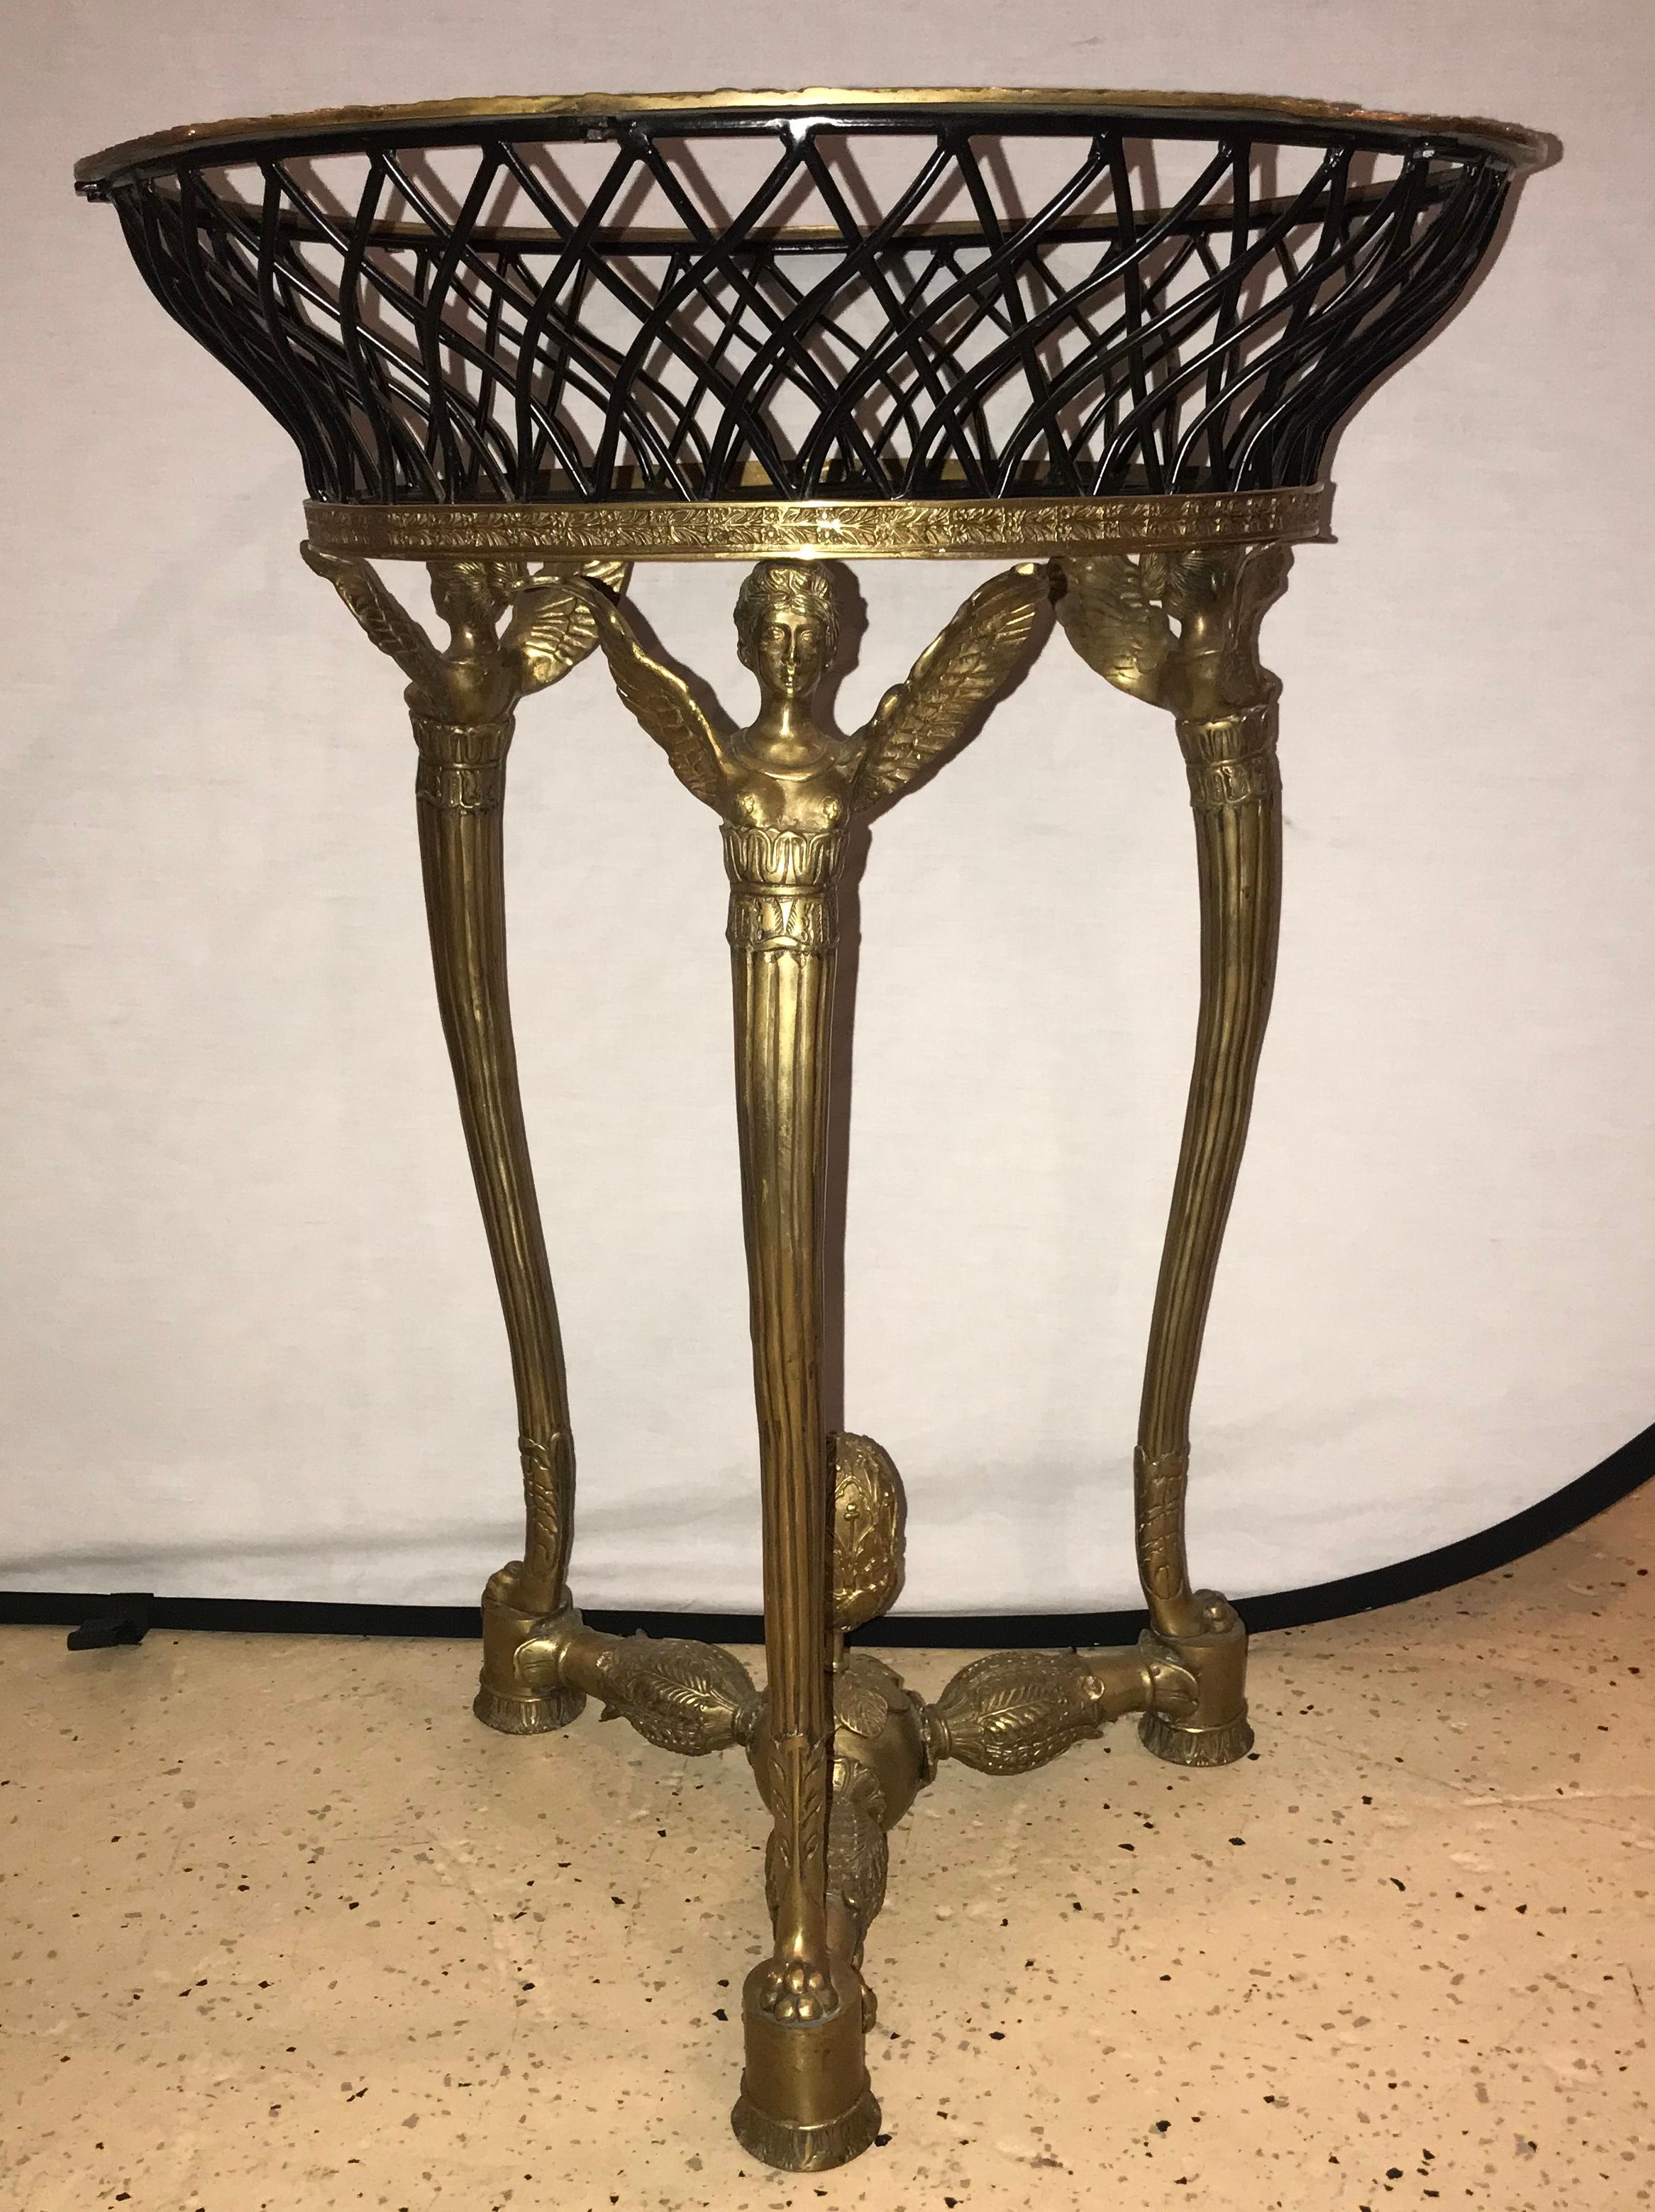 A 19th or early 20th century Empire bronze basket or jardinière on figural gilt bronze stand. The bronze framed ebony weaved basket having a group of three triangular shaped winged woman on small pedestals all in a gilt bronze. This finely cast